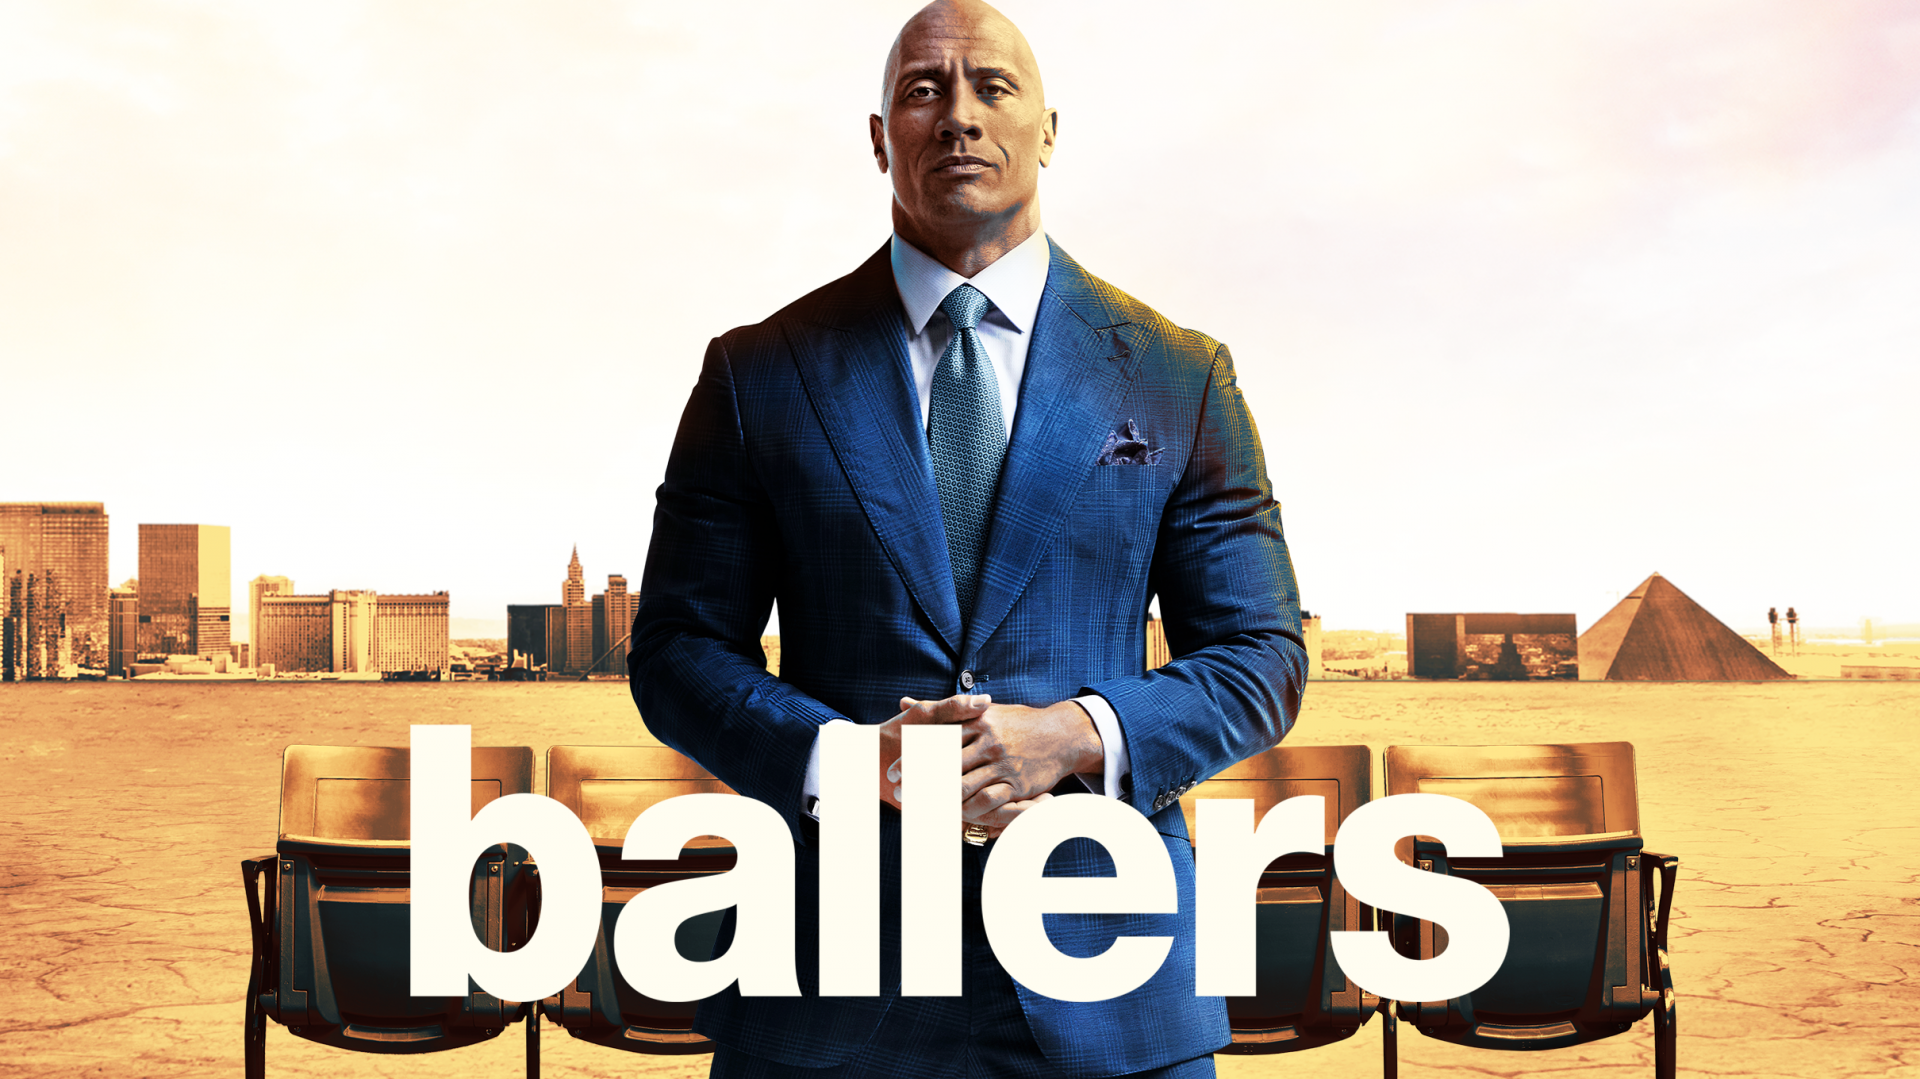 HBO's Ballers S1-3 is on Showmax